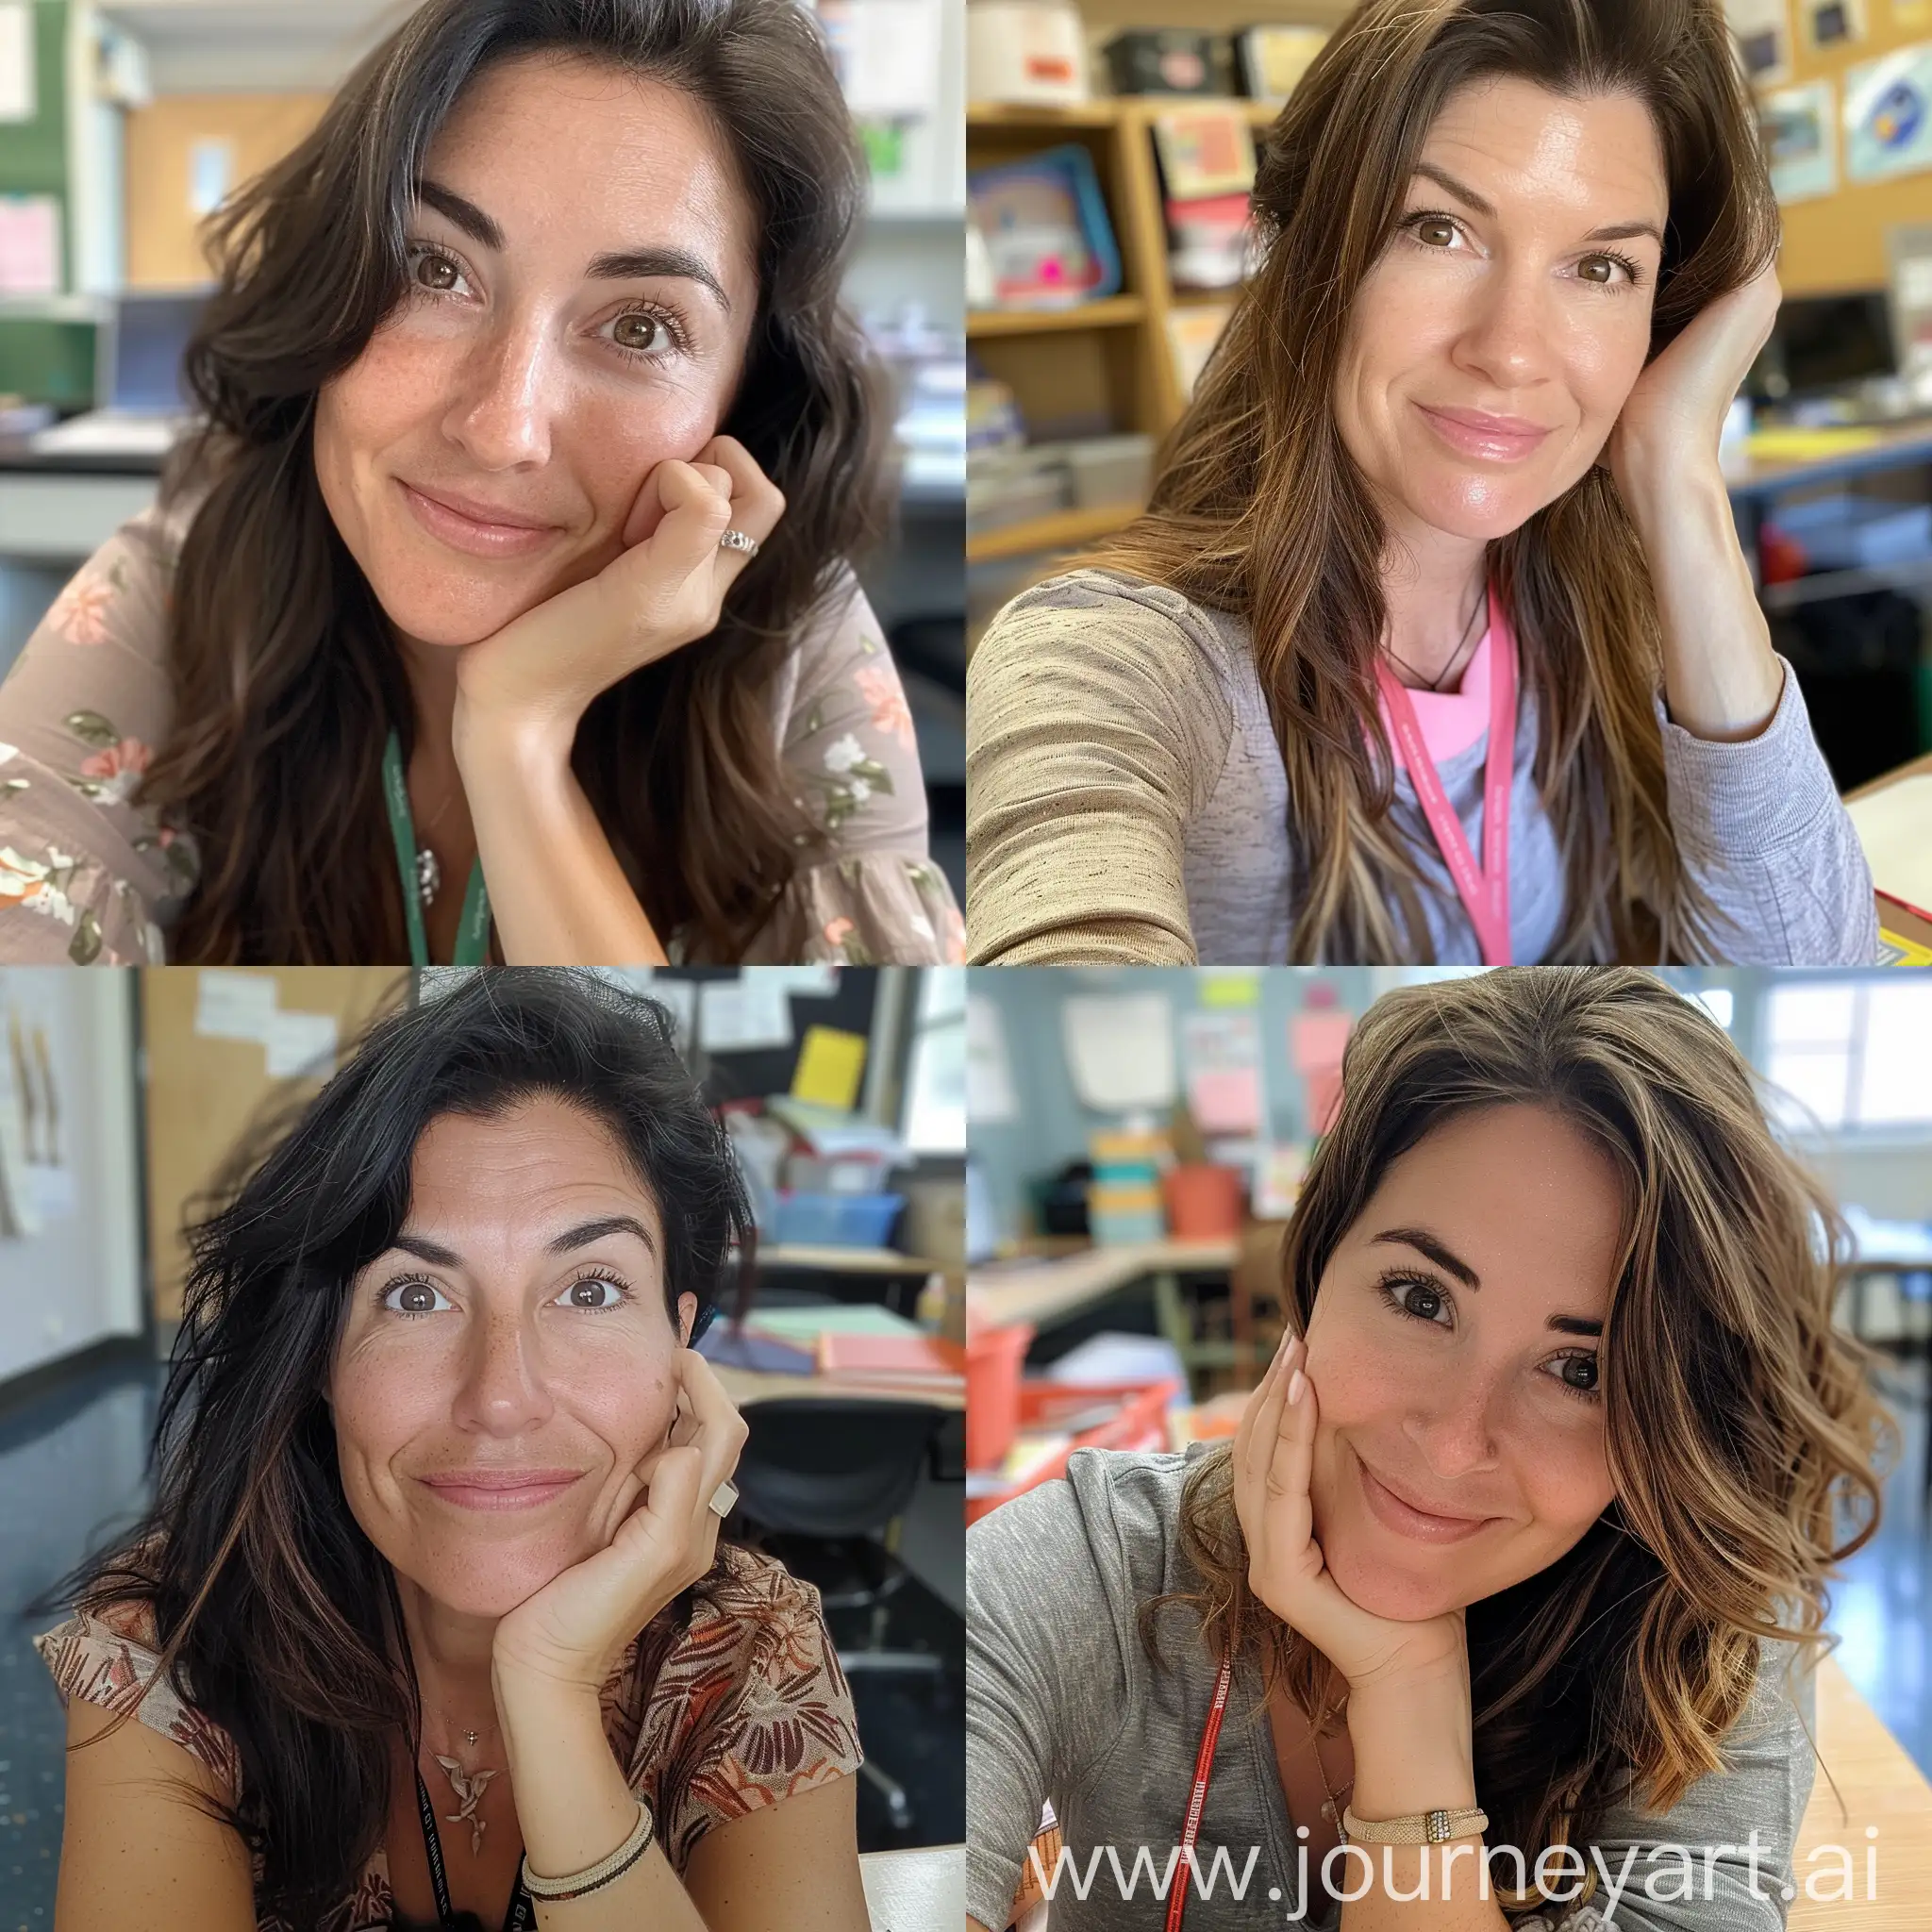 Typical elementary school teacher taking a selfie at her desk, super model face, casual clothes, hand resting on cheek, lanyard around neck, close up selfie